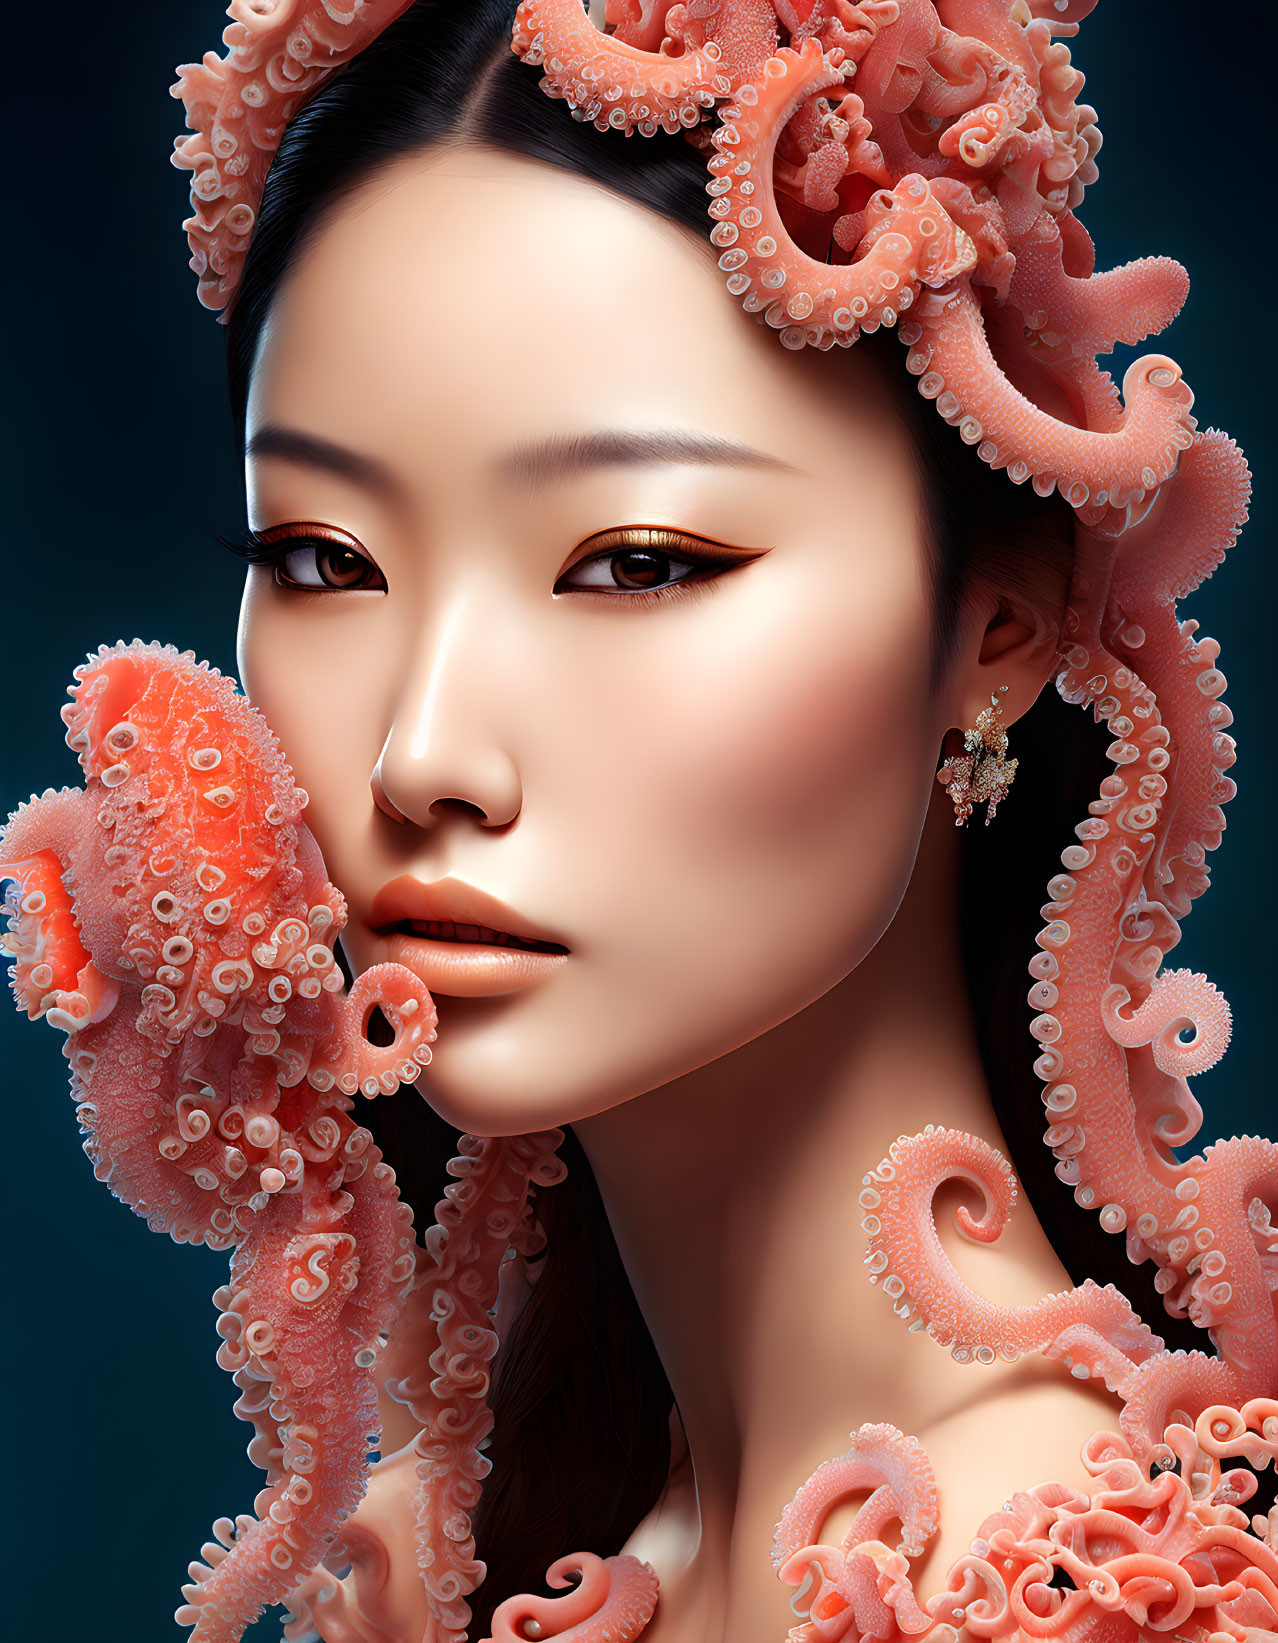 Detailed digital portrait of woman with intricate headdress and pink coral accessories on blue background